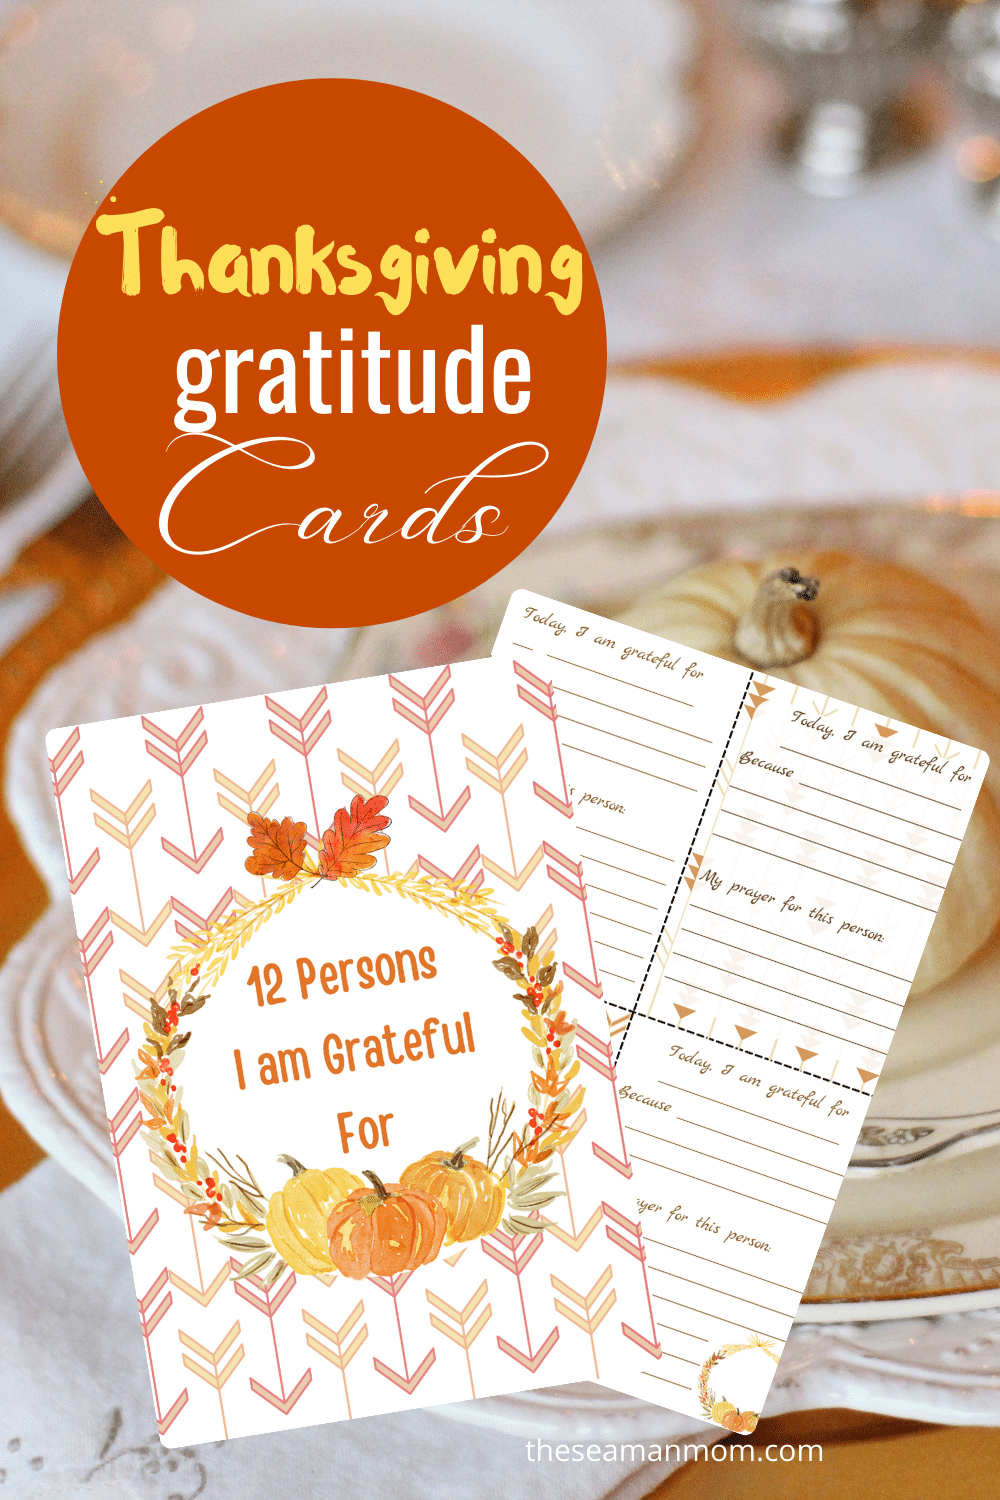 PRINTABLE THANKSGIVING CARDS 12 persons I am grateful for